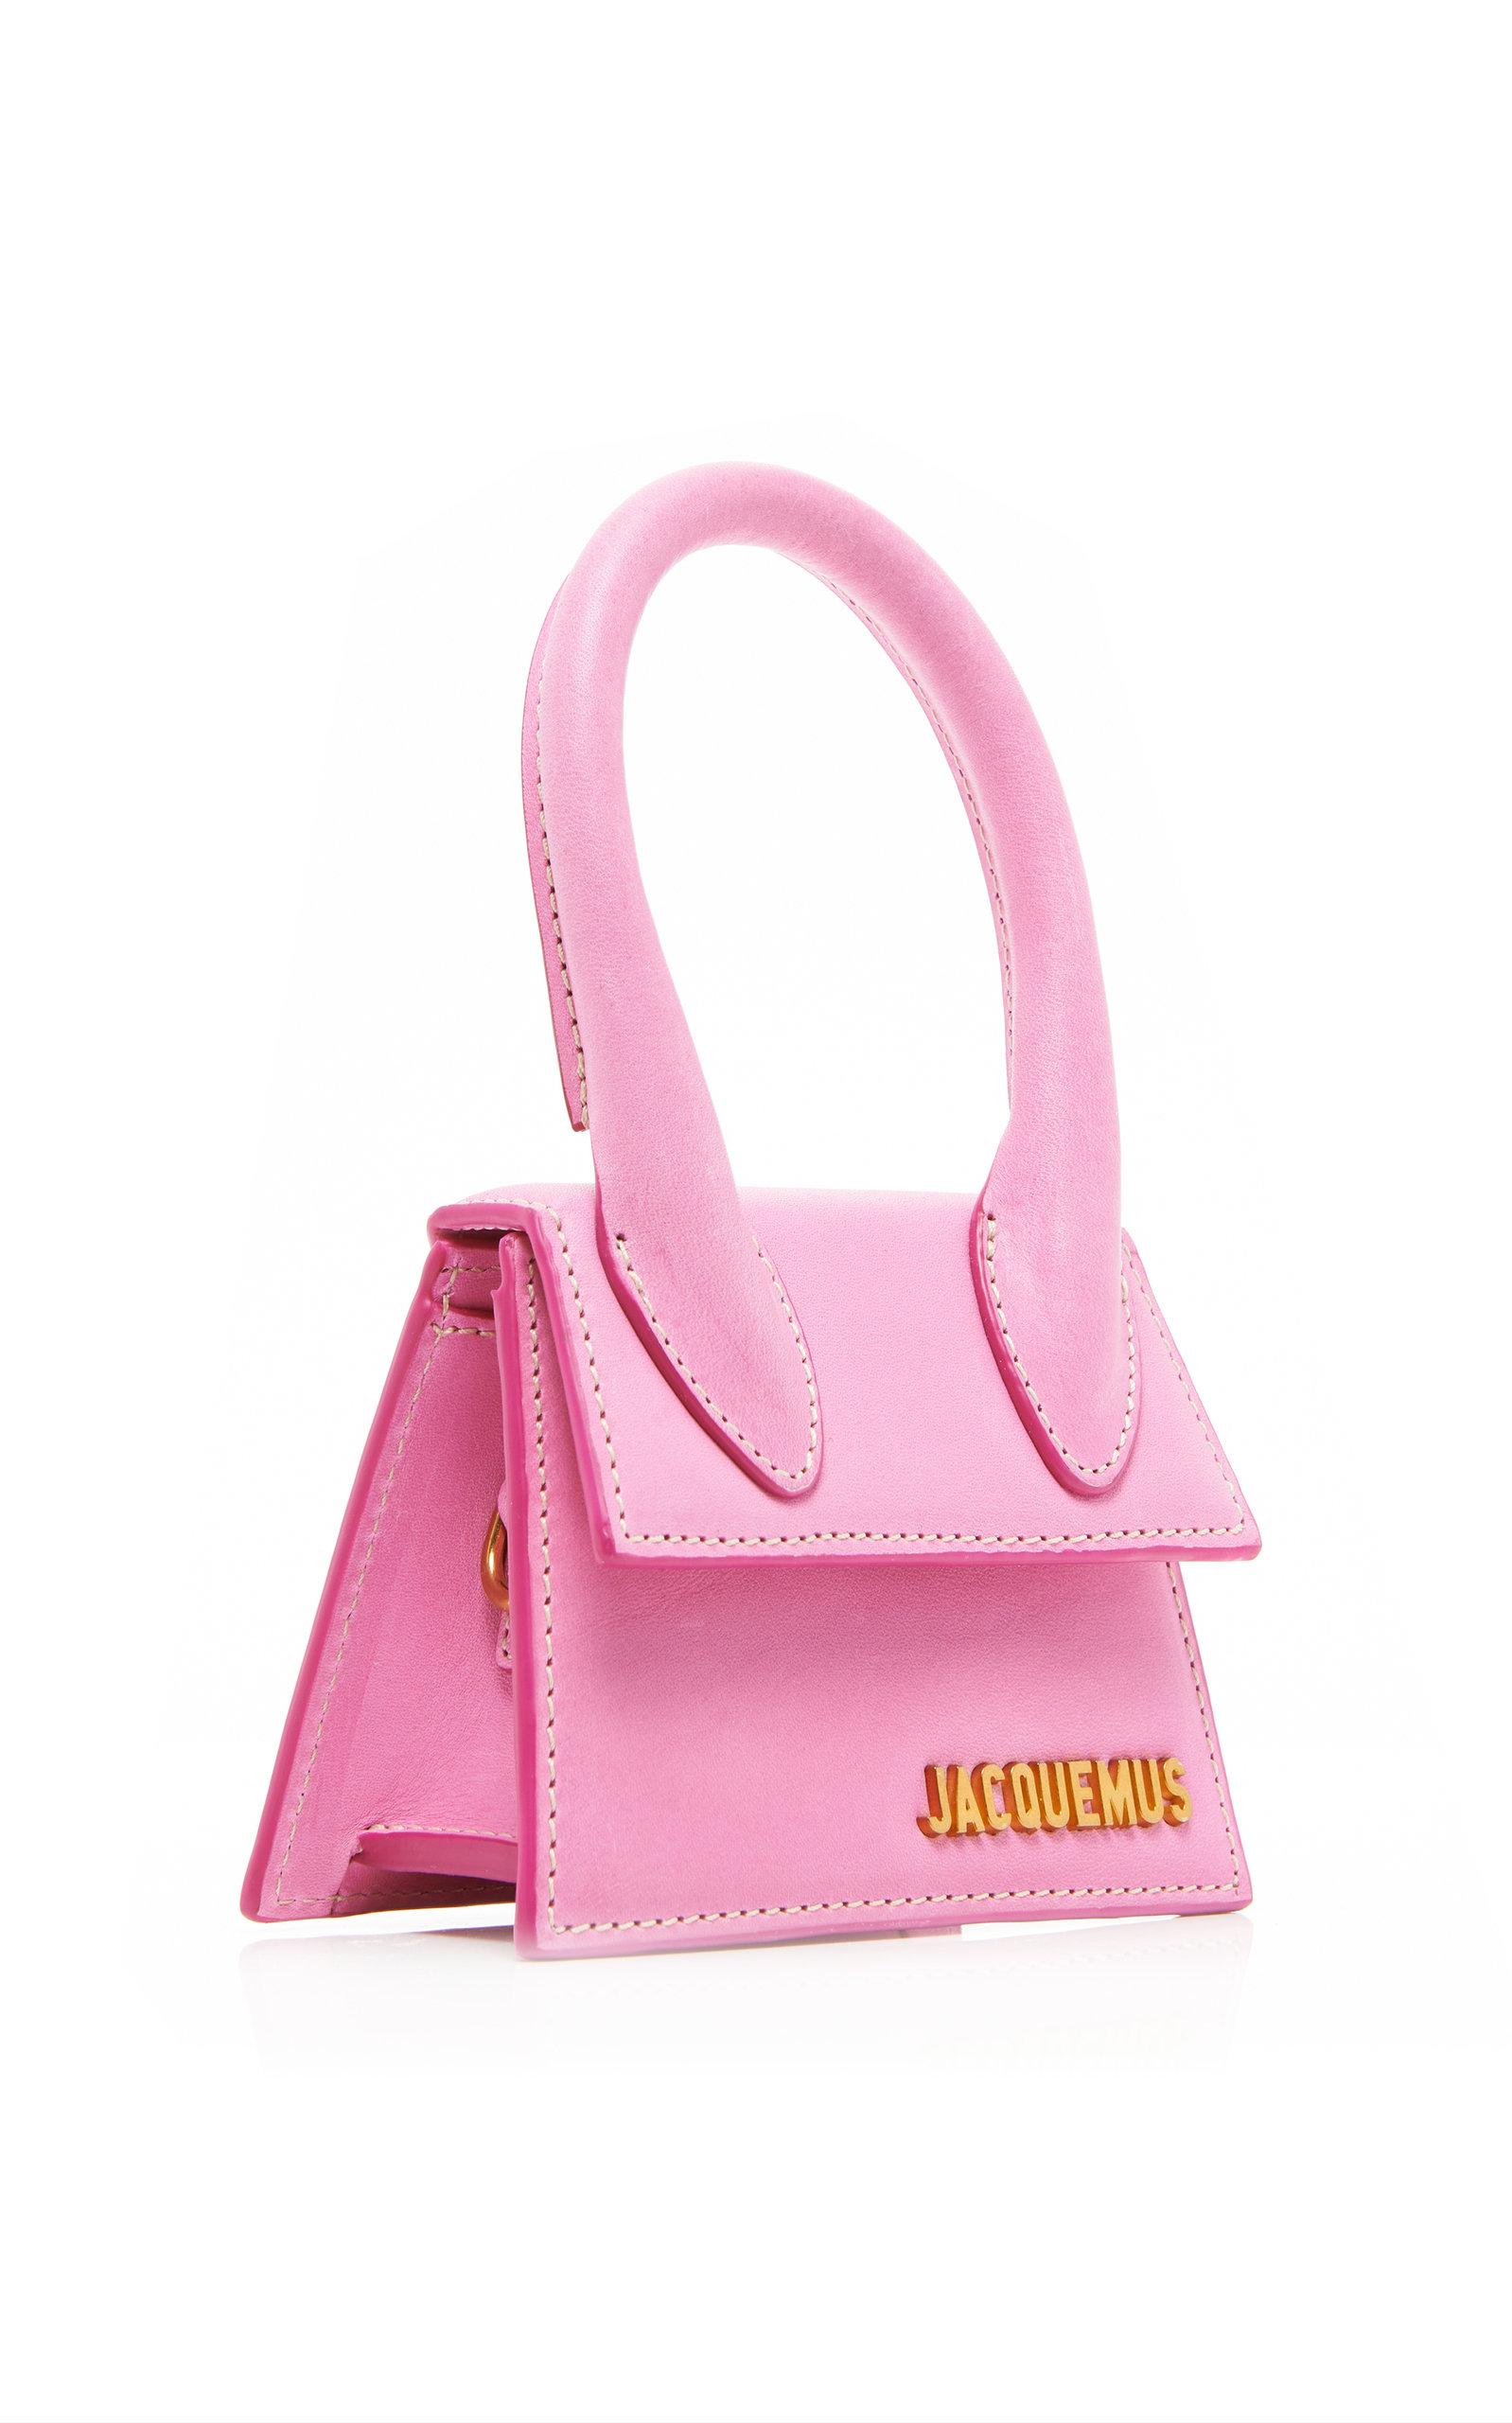 Jacquemus Le Chiquito Leather Bag in Pink - Lyst